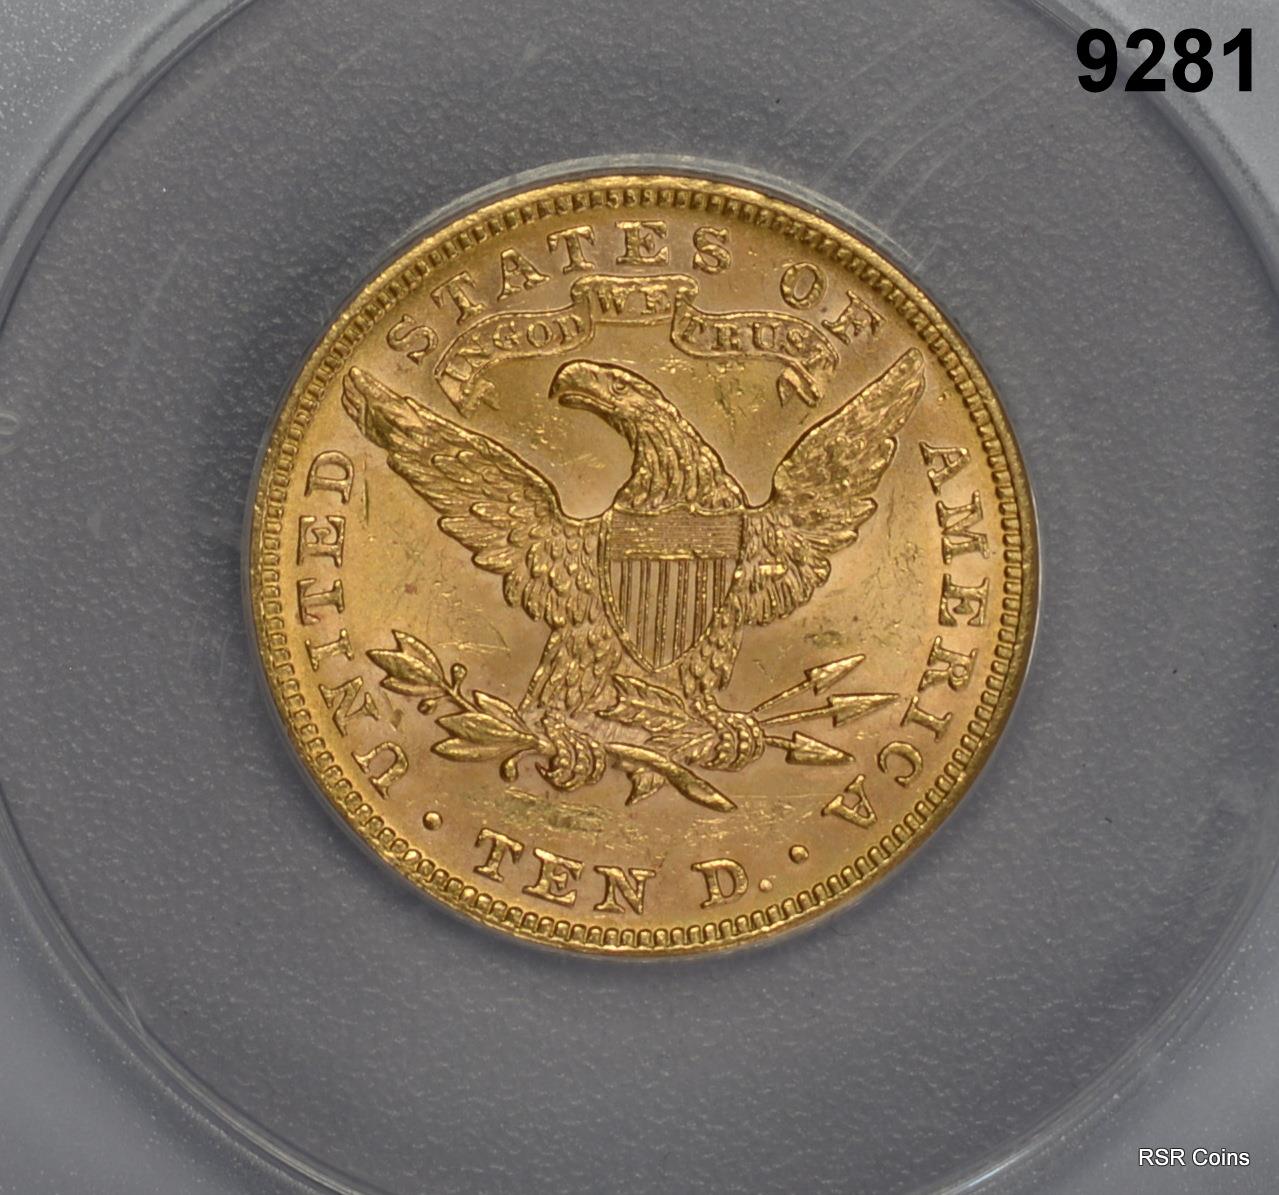 1894 $10 GOLD LIBERTY ANACS CERTIFIED MS61 #9281